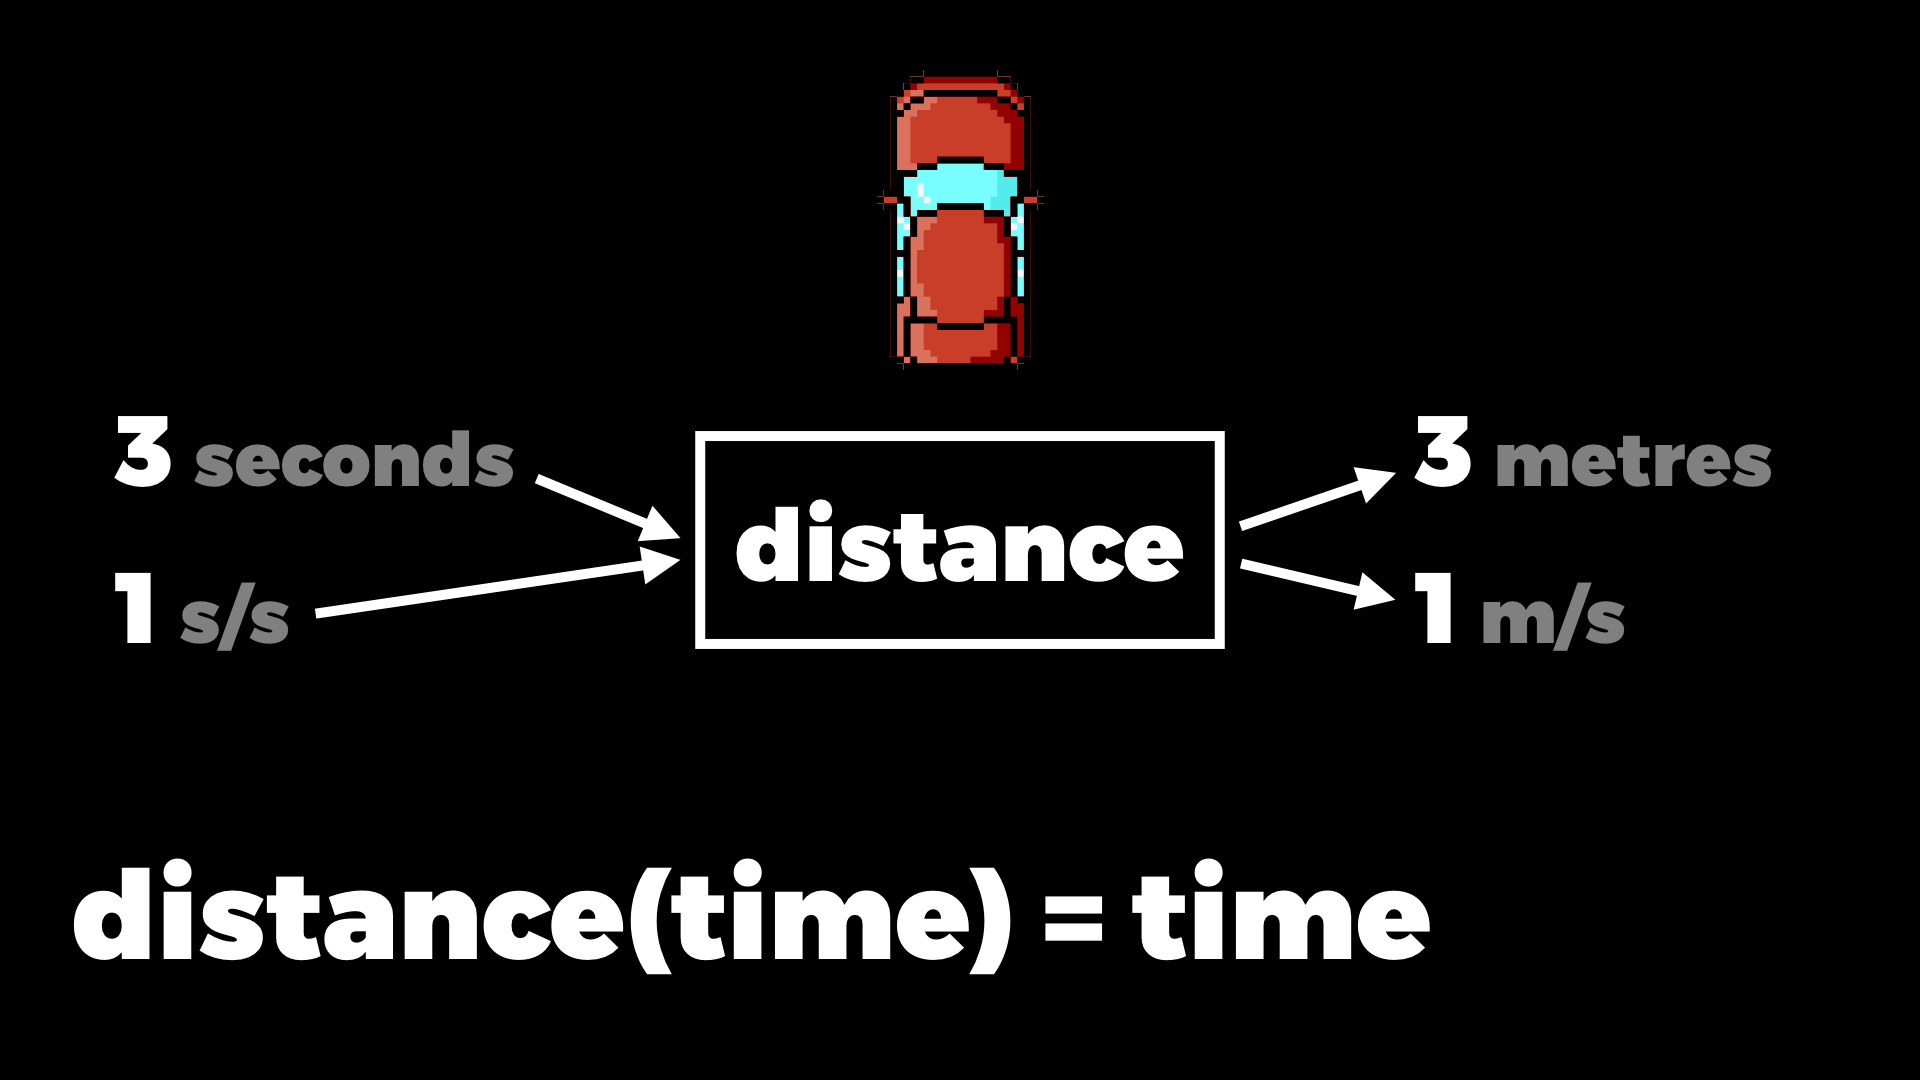 3 seconds and 1 s/s going into the red car’s distance function; 3 metres and 1 m/s coming out